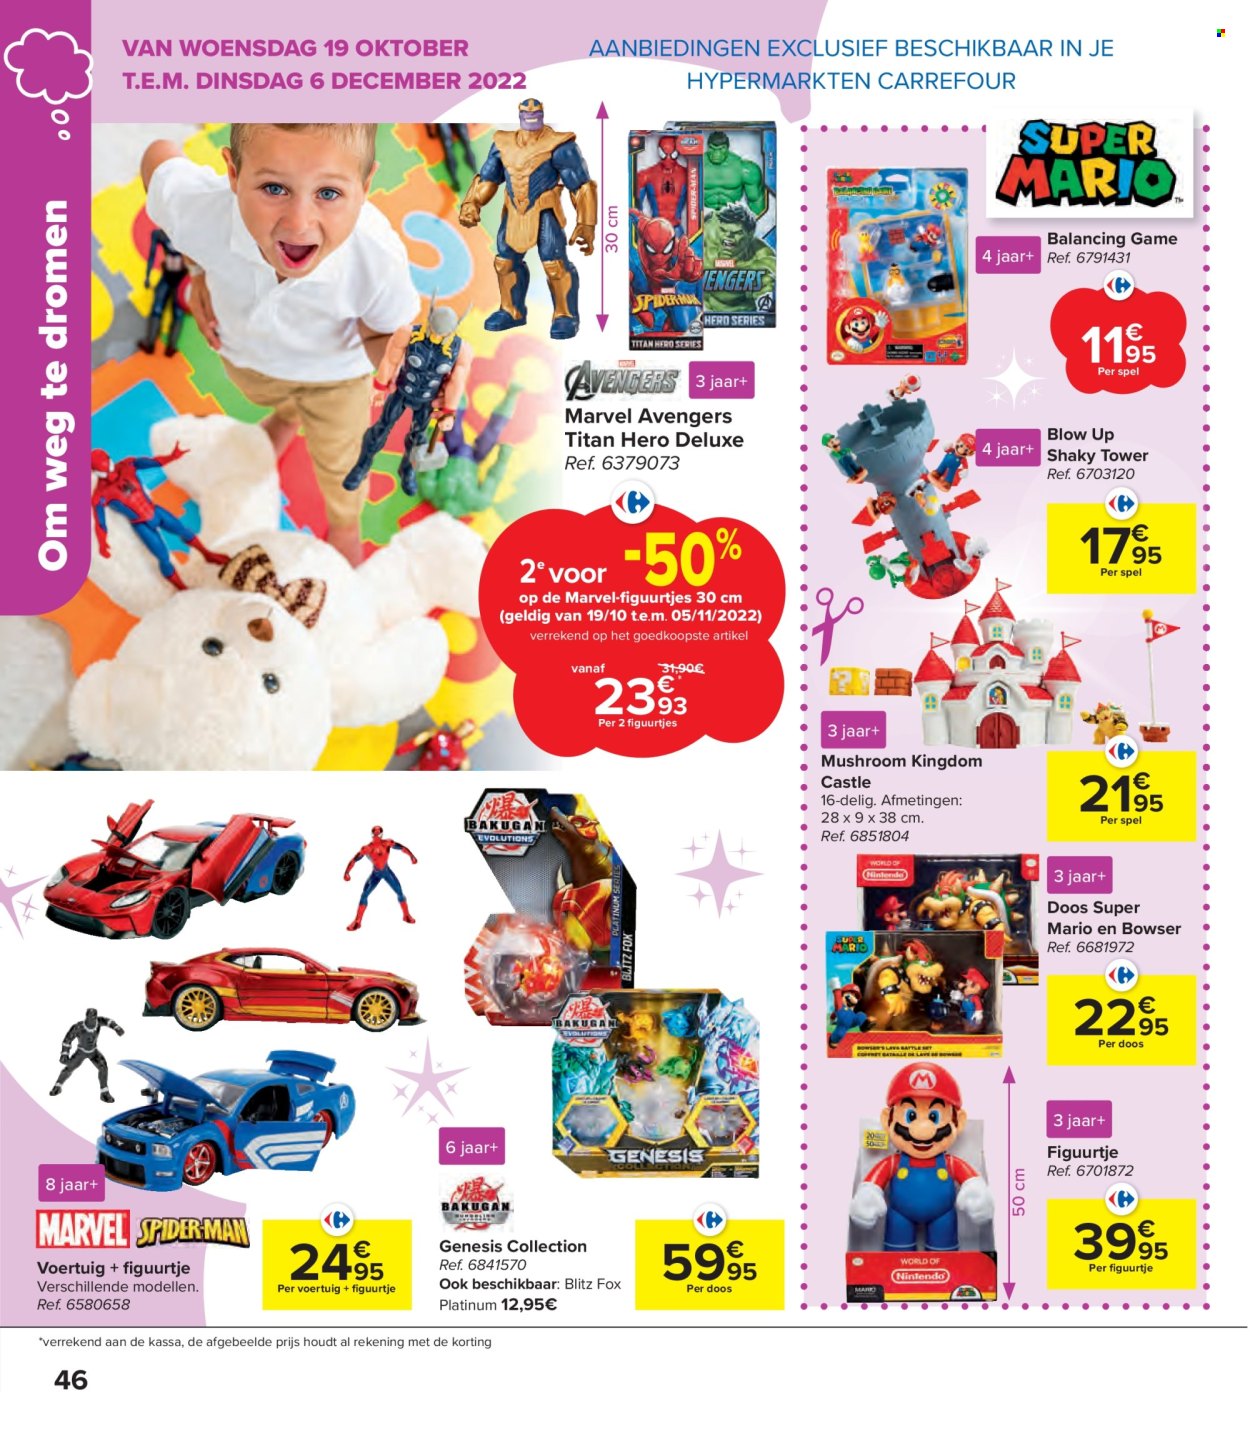 Catalogue Carrefour hypermarkt - 19.10.2022 - 6.12.2022. Page 46.